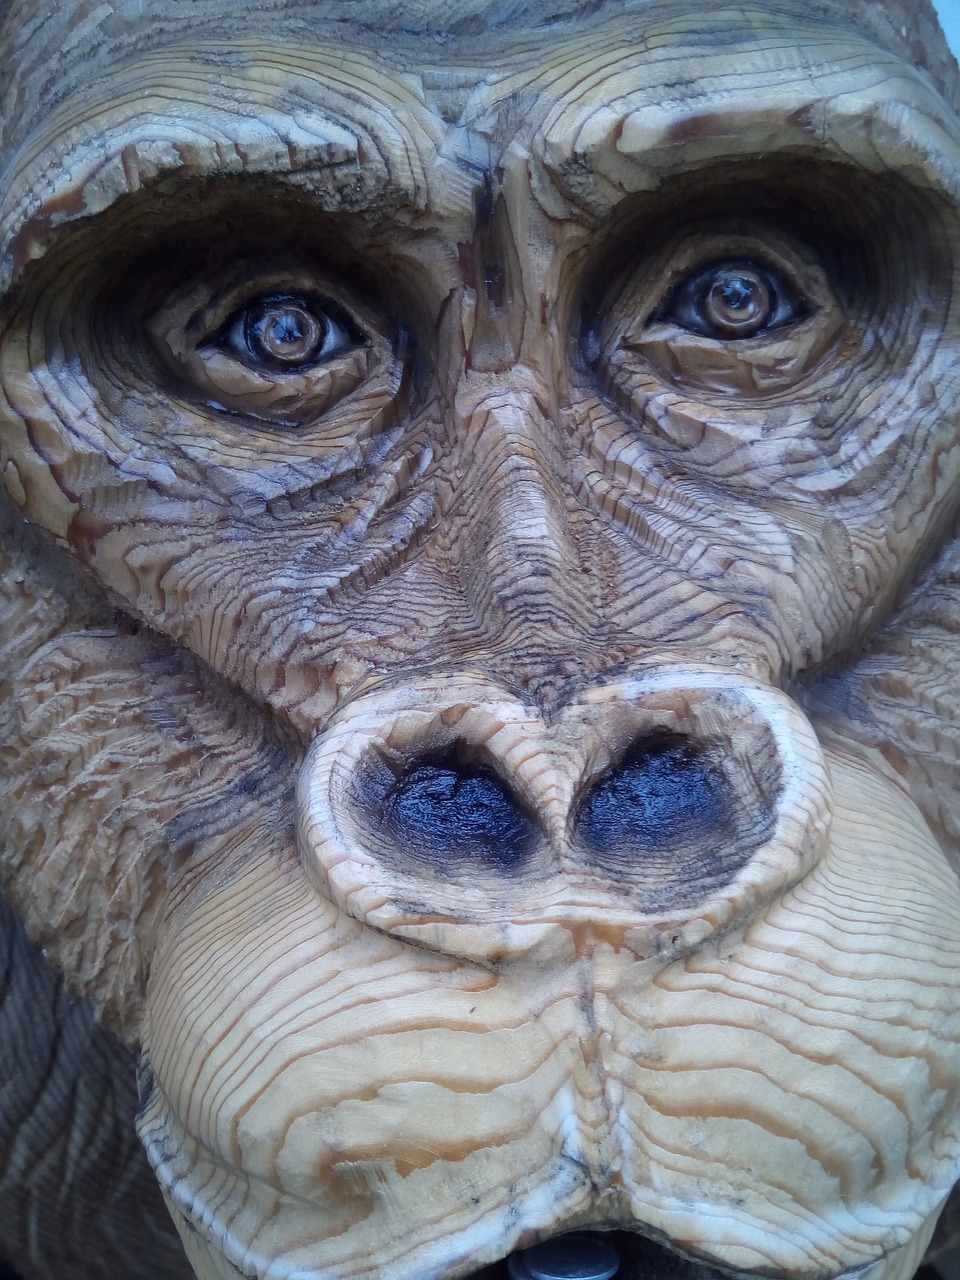 gorilla wood carving chainsaw art free photo